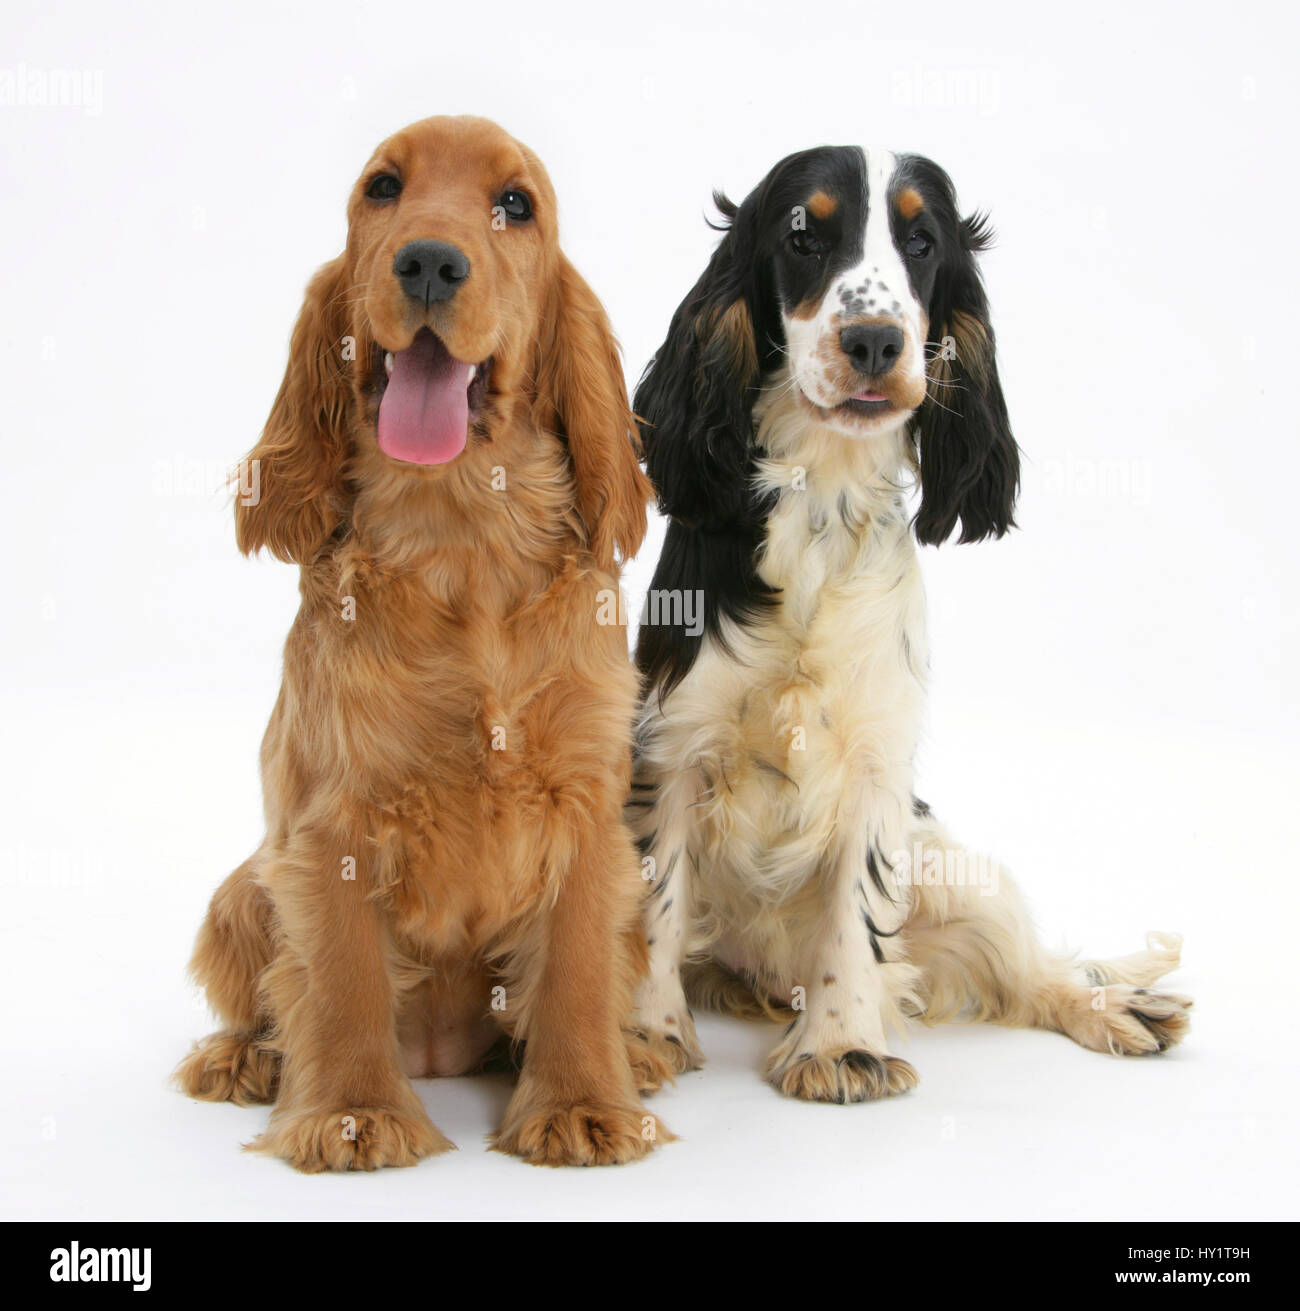 Red/Golden and tricolour English Cocker Spaniels. Stock Photo